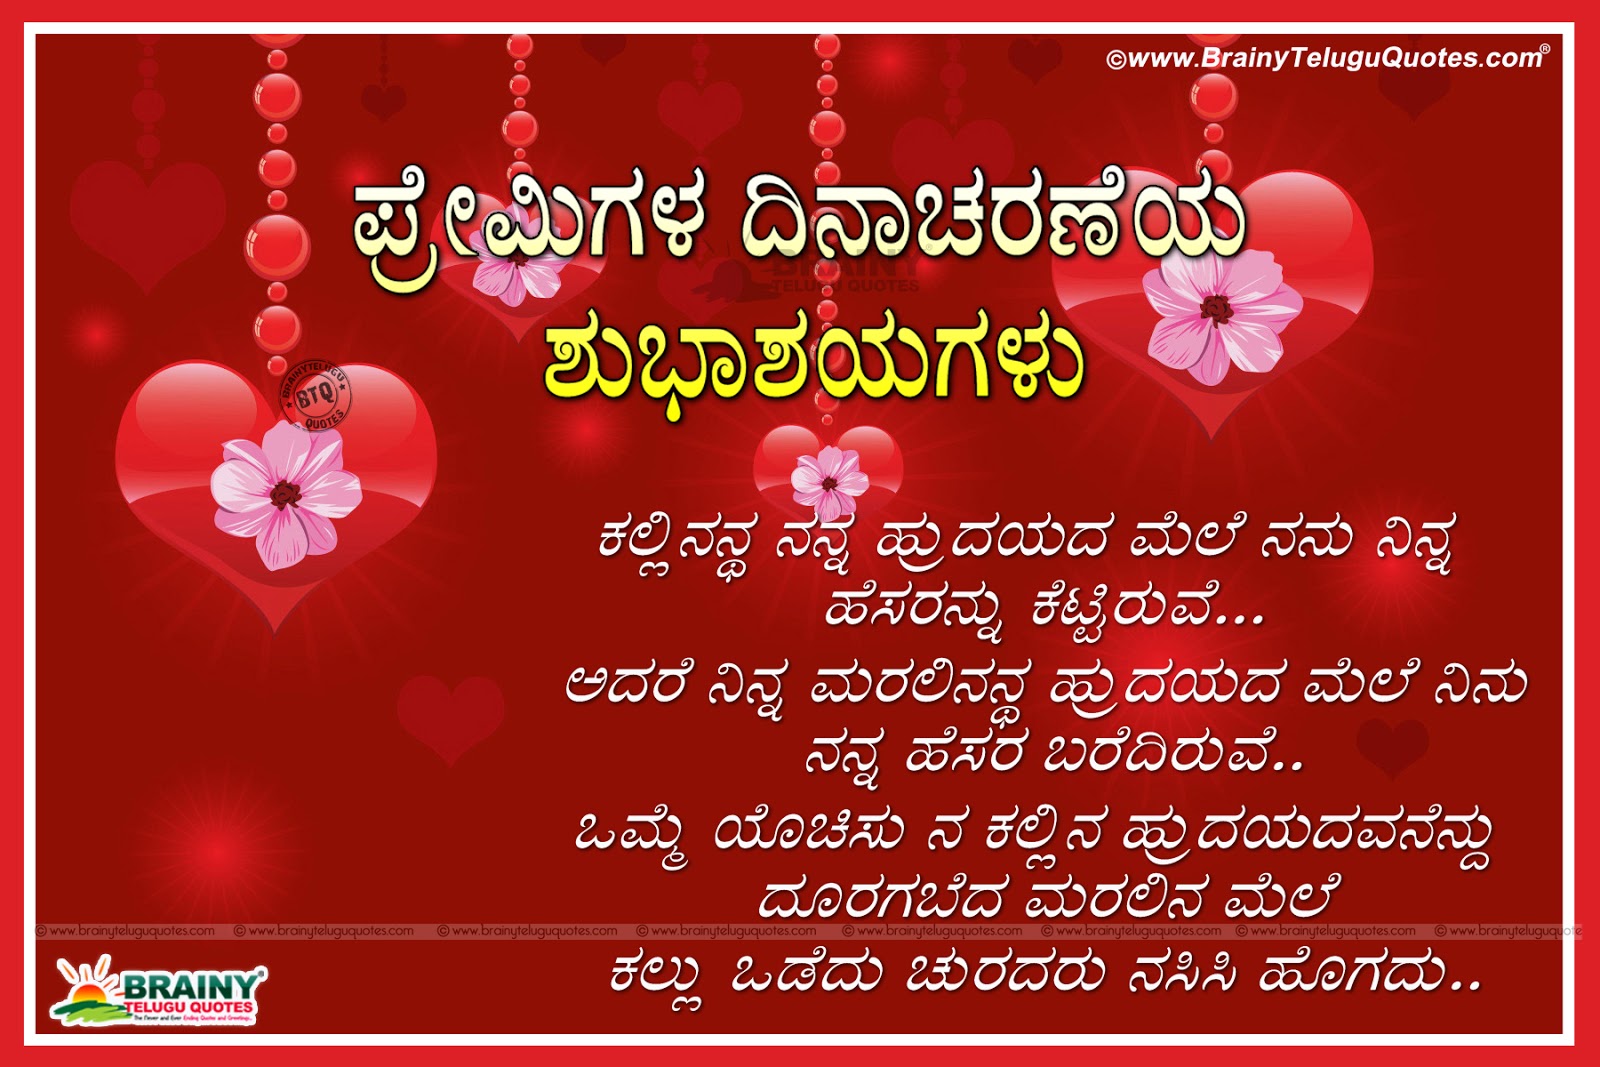 Valentines Day Quotations and Messages greetings in Kannada Language